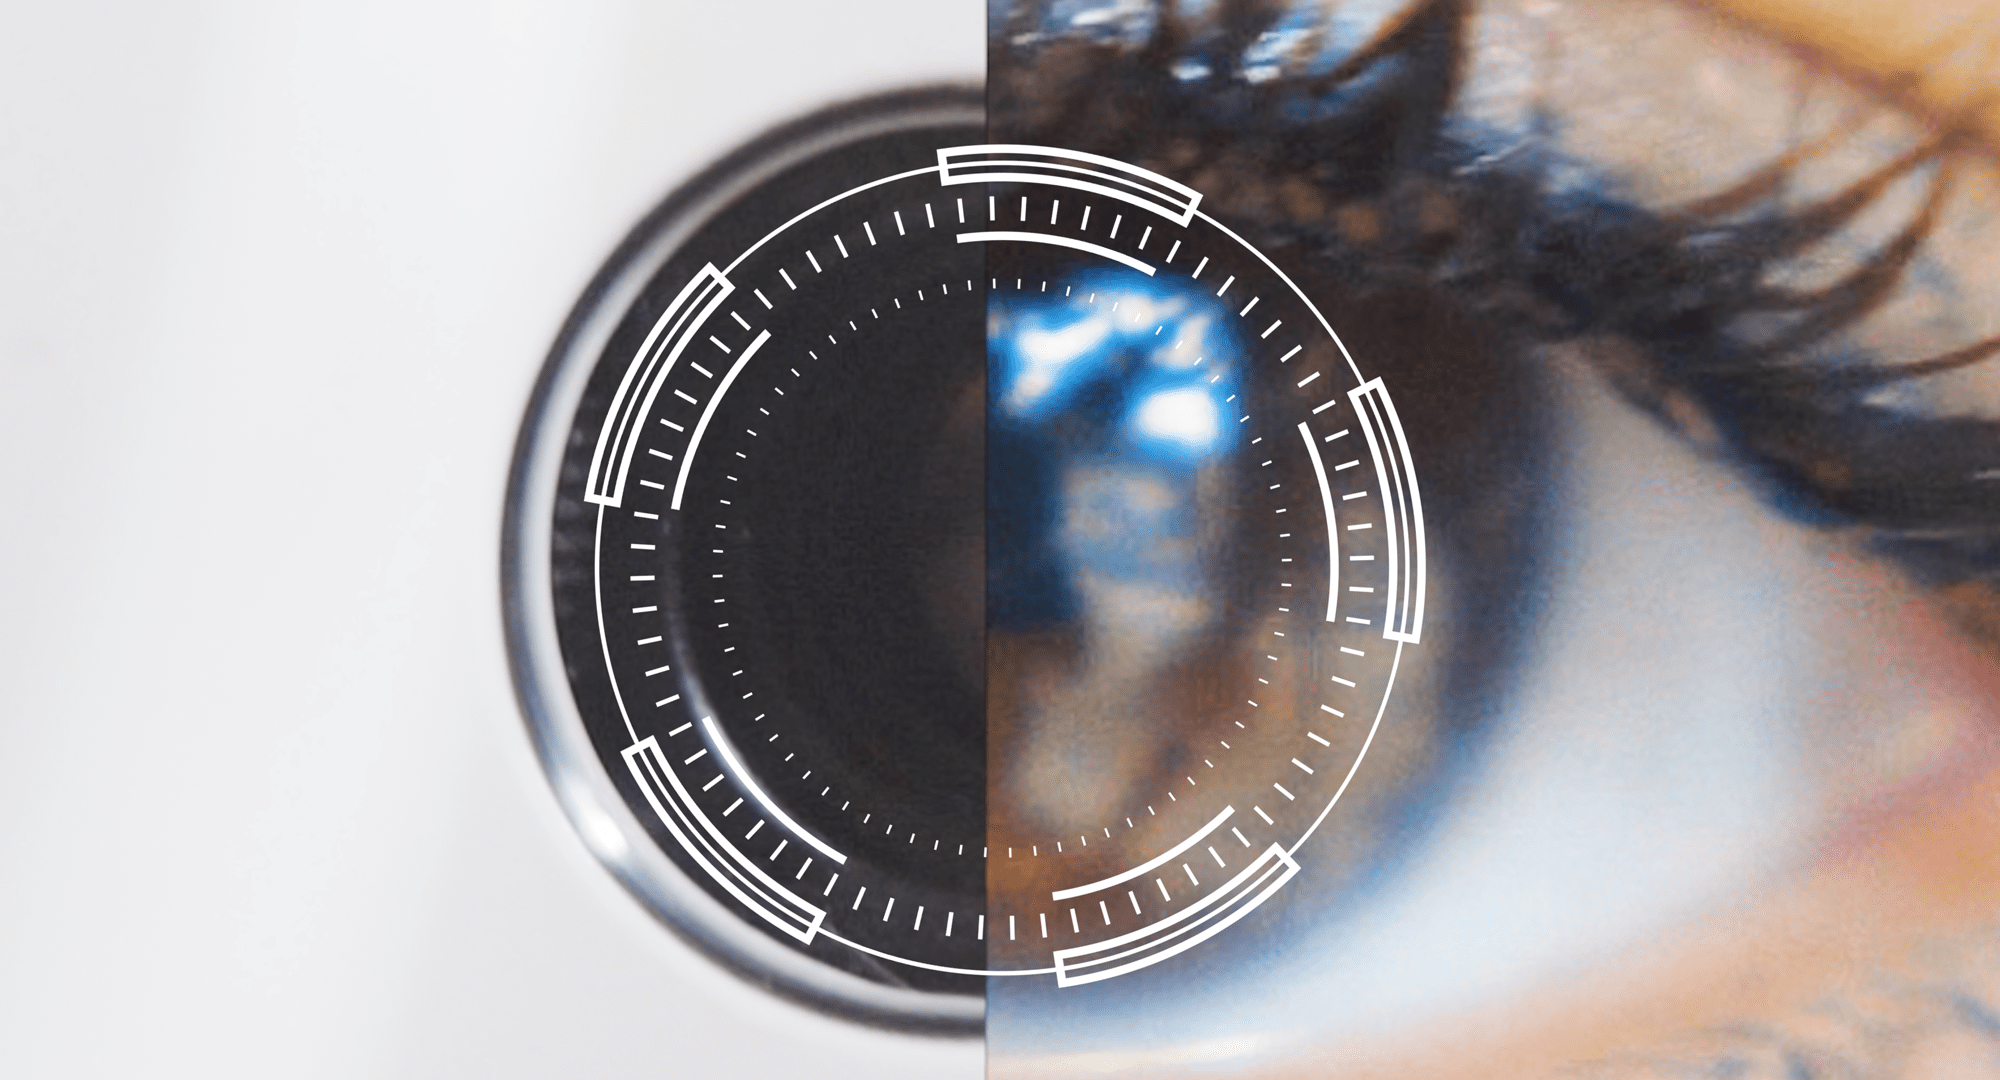 Contact Lenses – A fabulous addition to your eyewear options